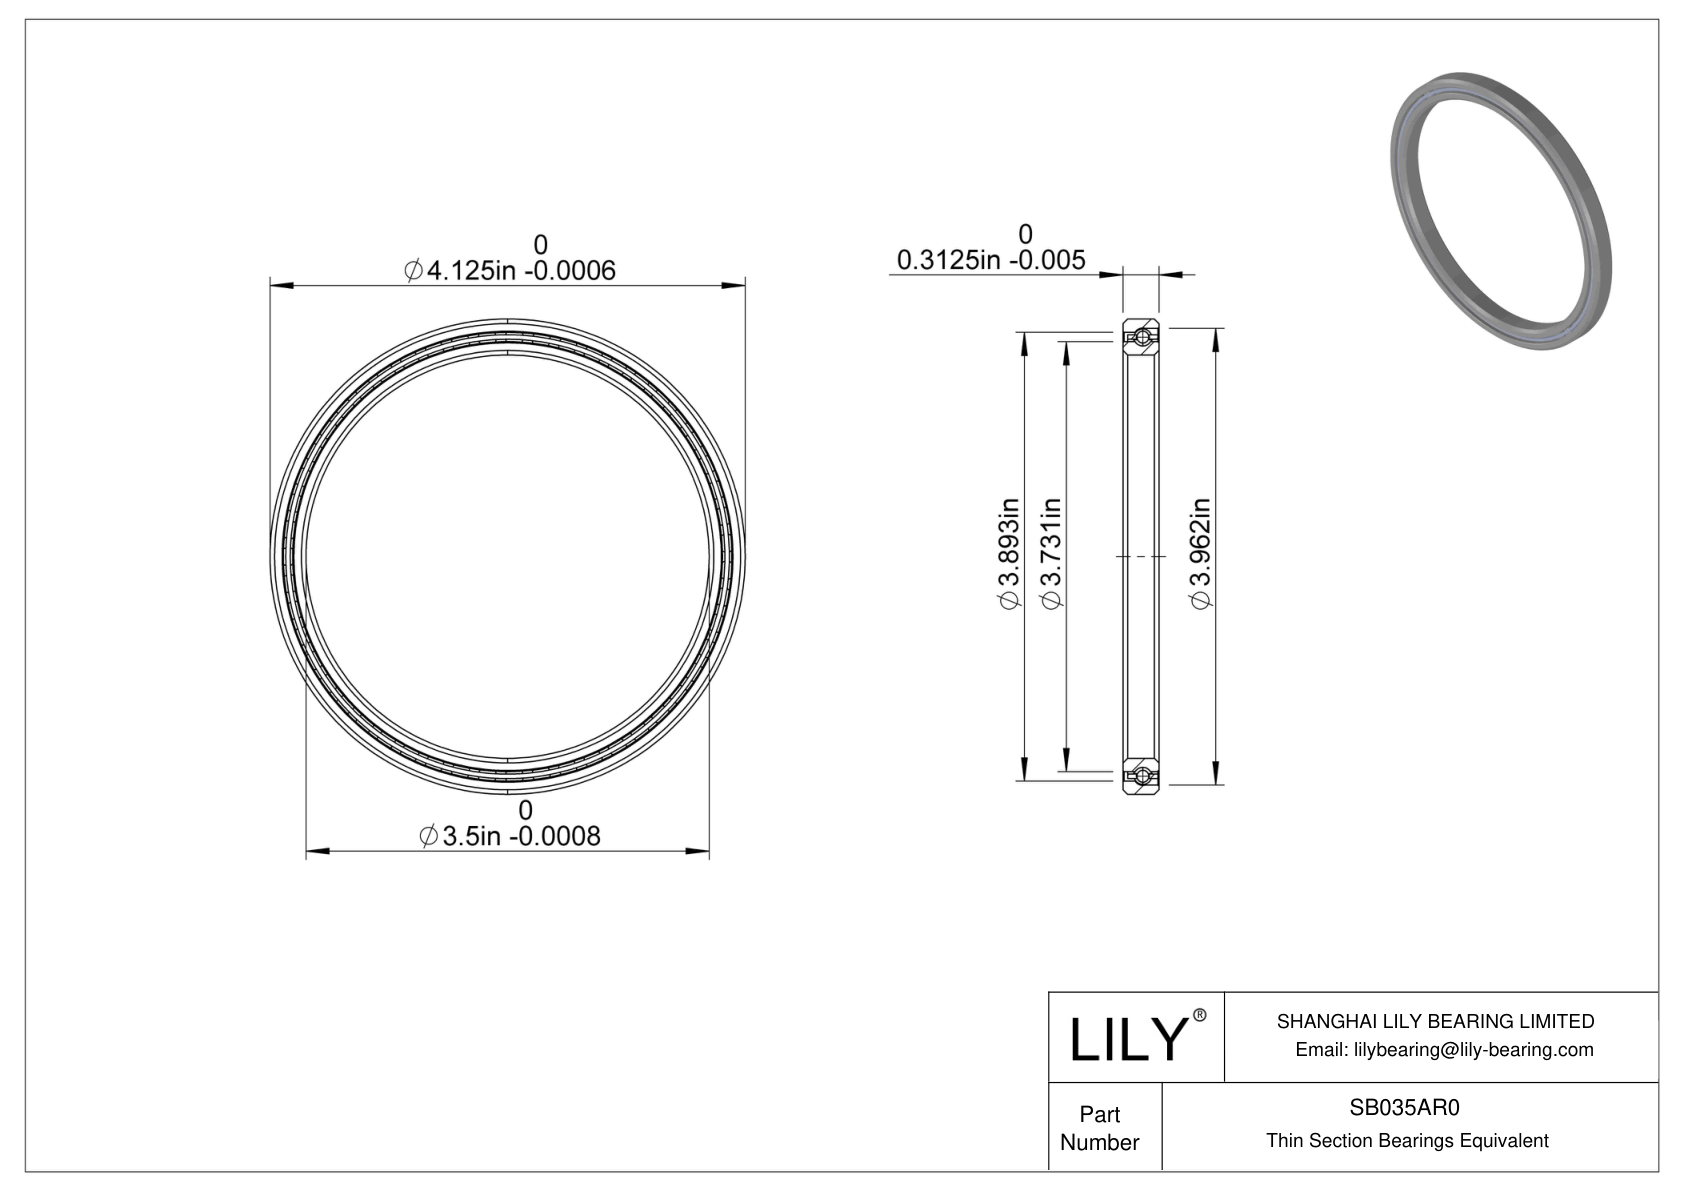 SB035AR0 Constant Section (CS) Bearings cad drawing